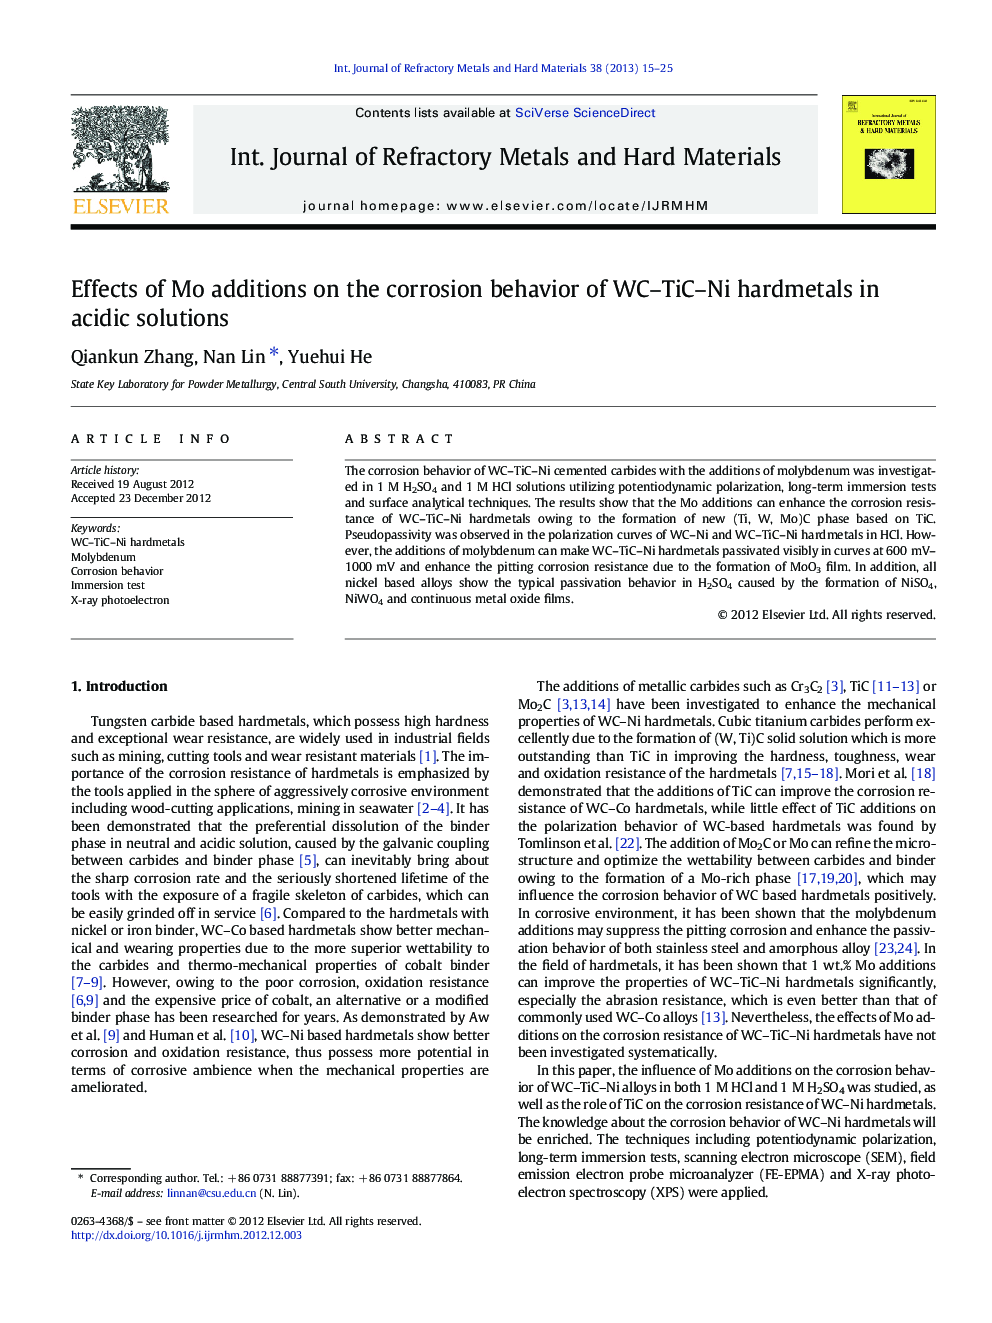 Effects of Mo additions on the corrosion behavior of WC-TiC-Ni hardmetals in acidic solutions